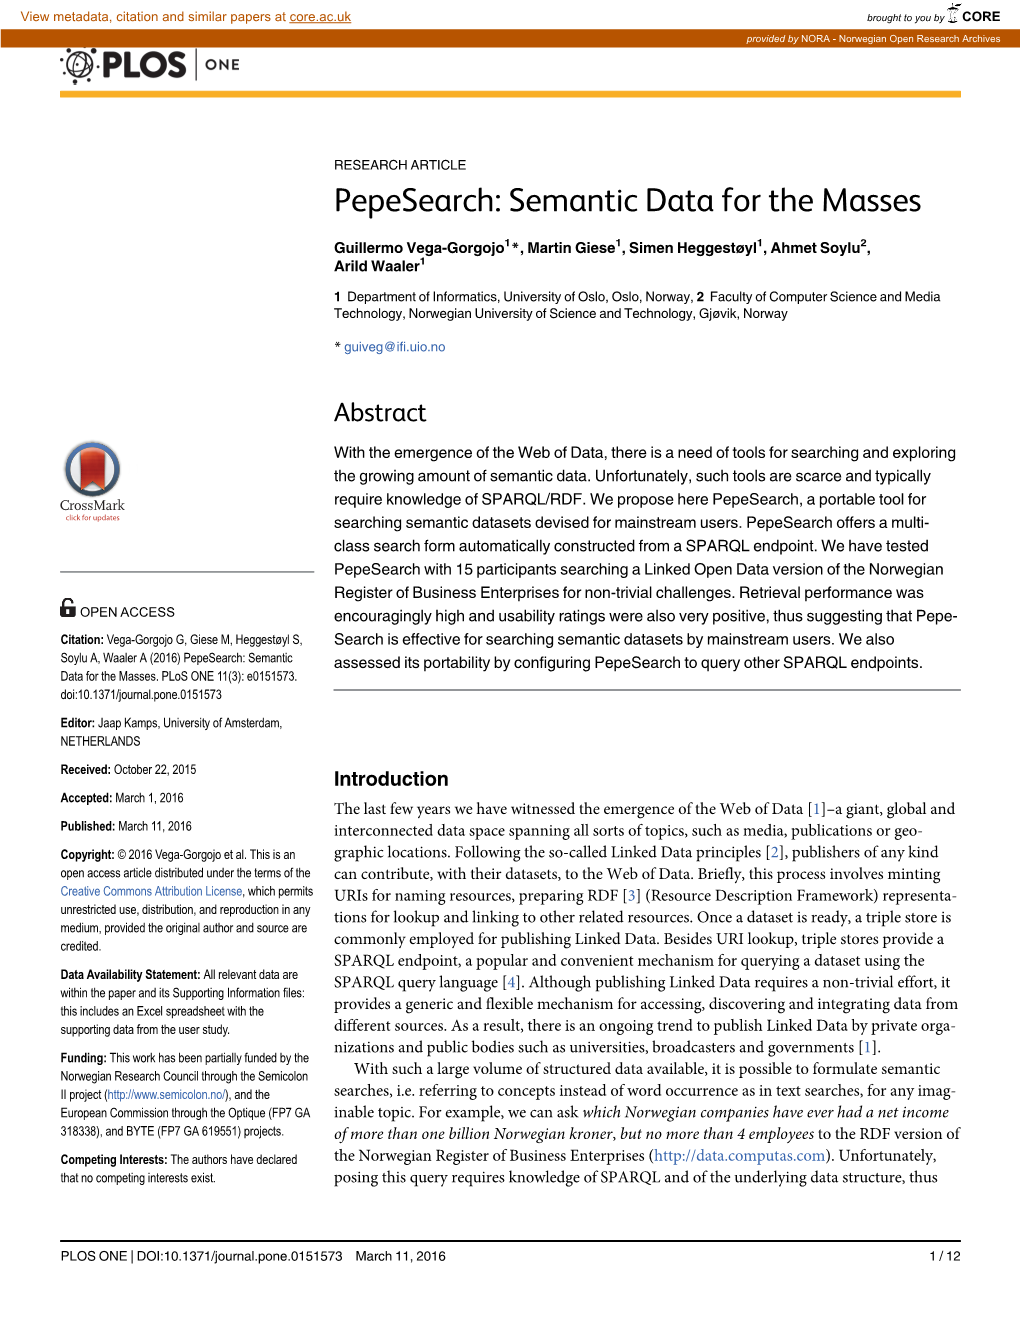 Pepesearch: Semantic Data for the Masses